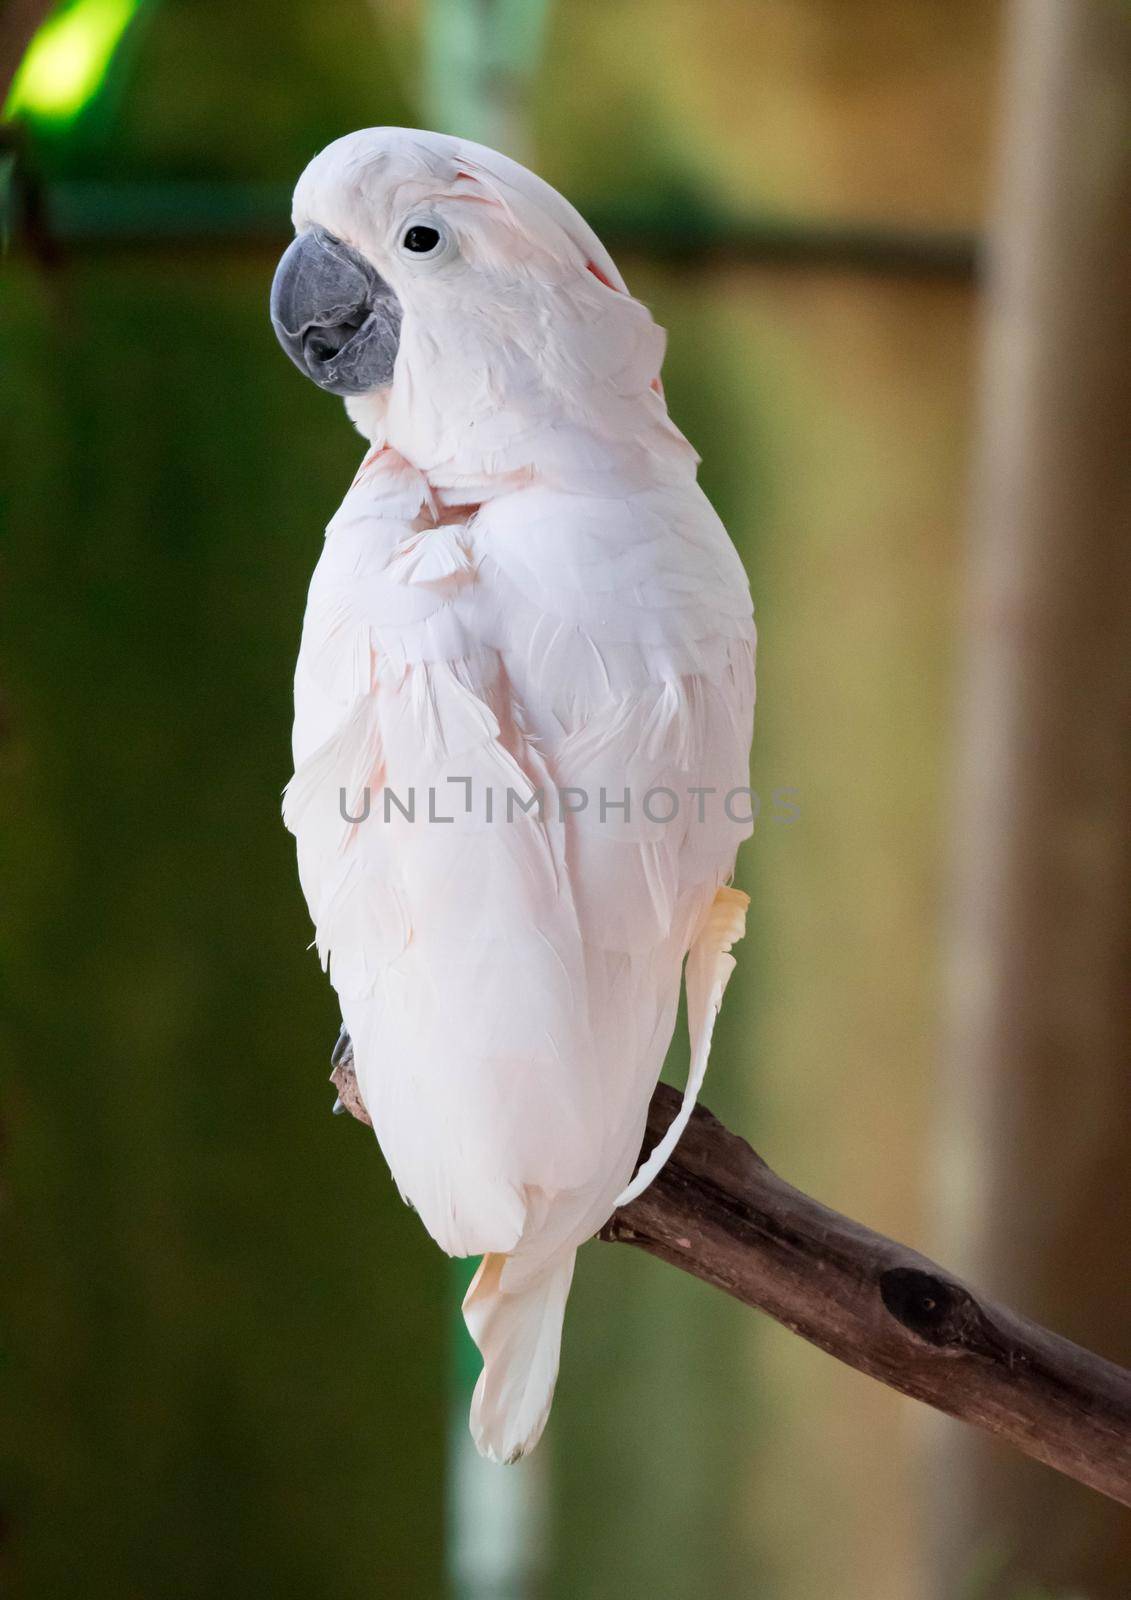 The Major Mitchell Cockatoo also known as Leadbeater's Cockatoo or Pink Cockatoo